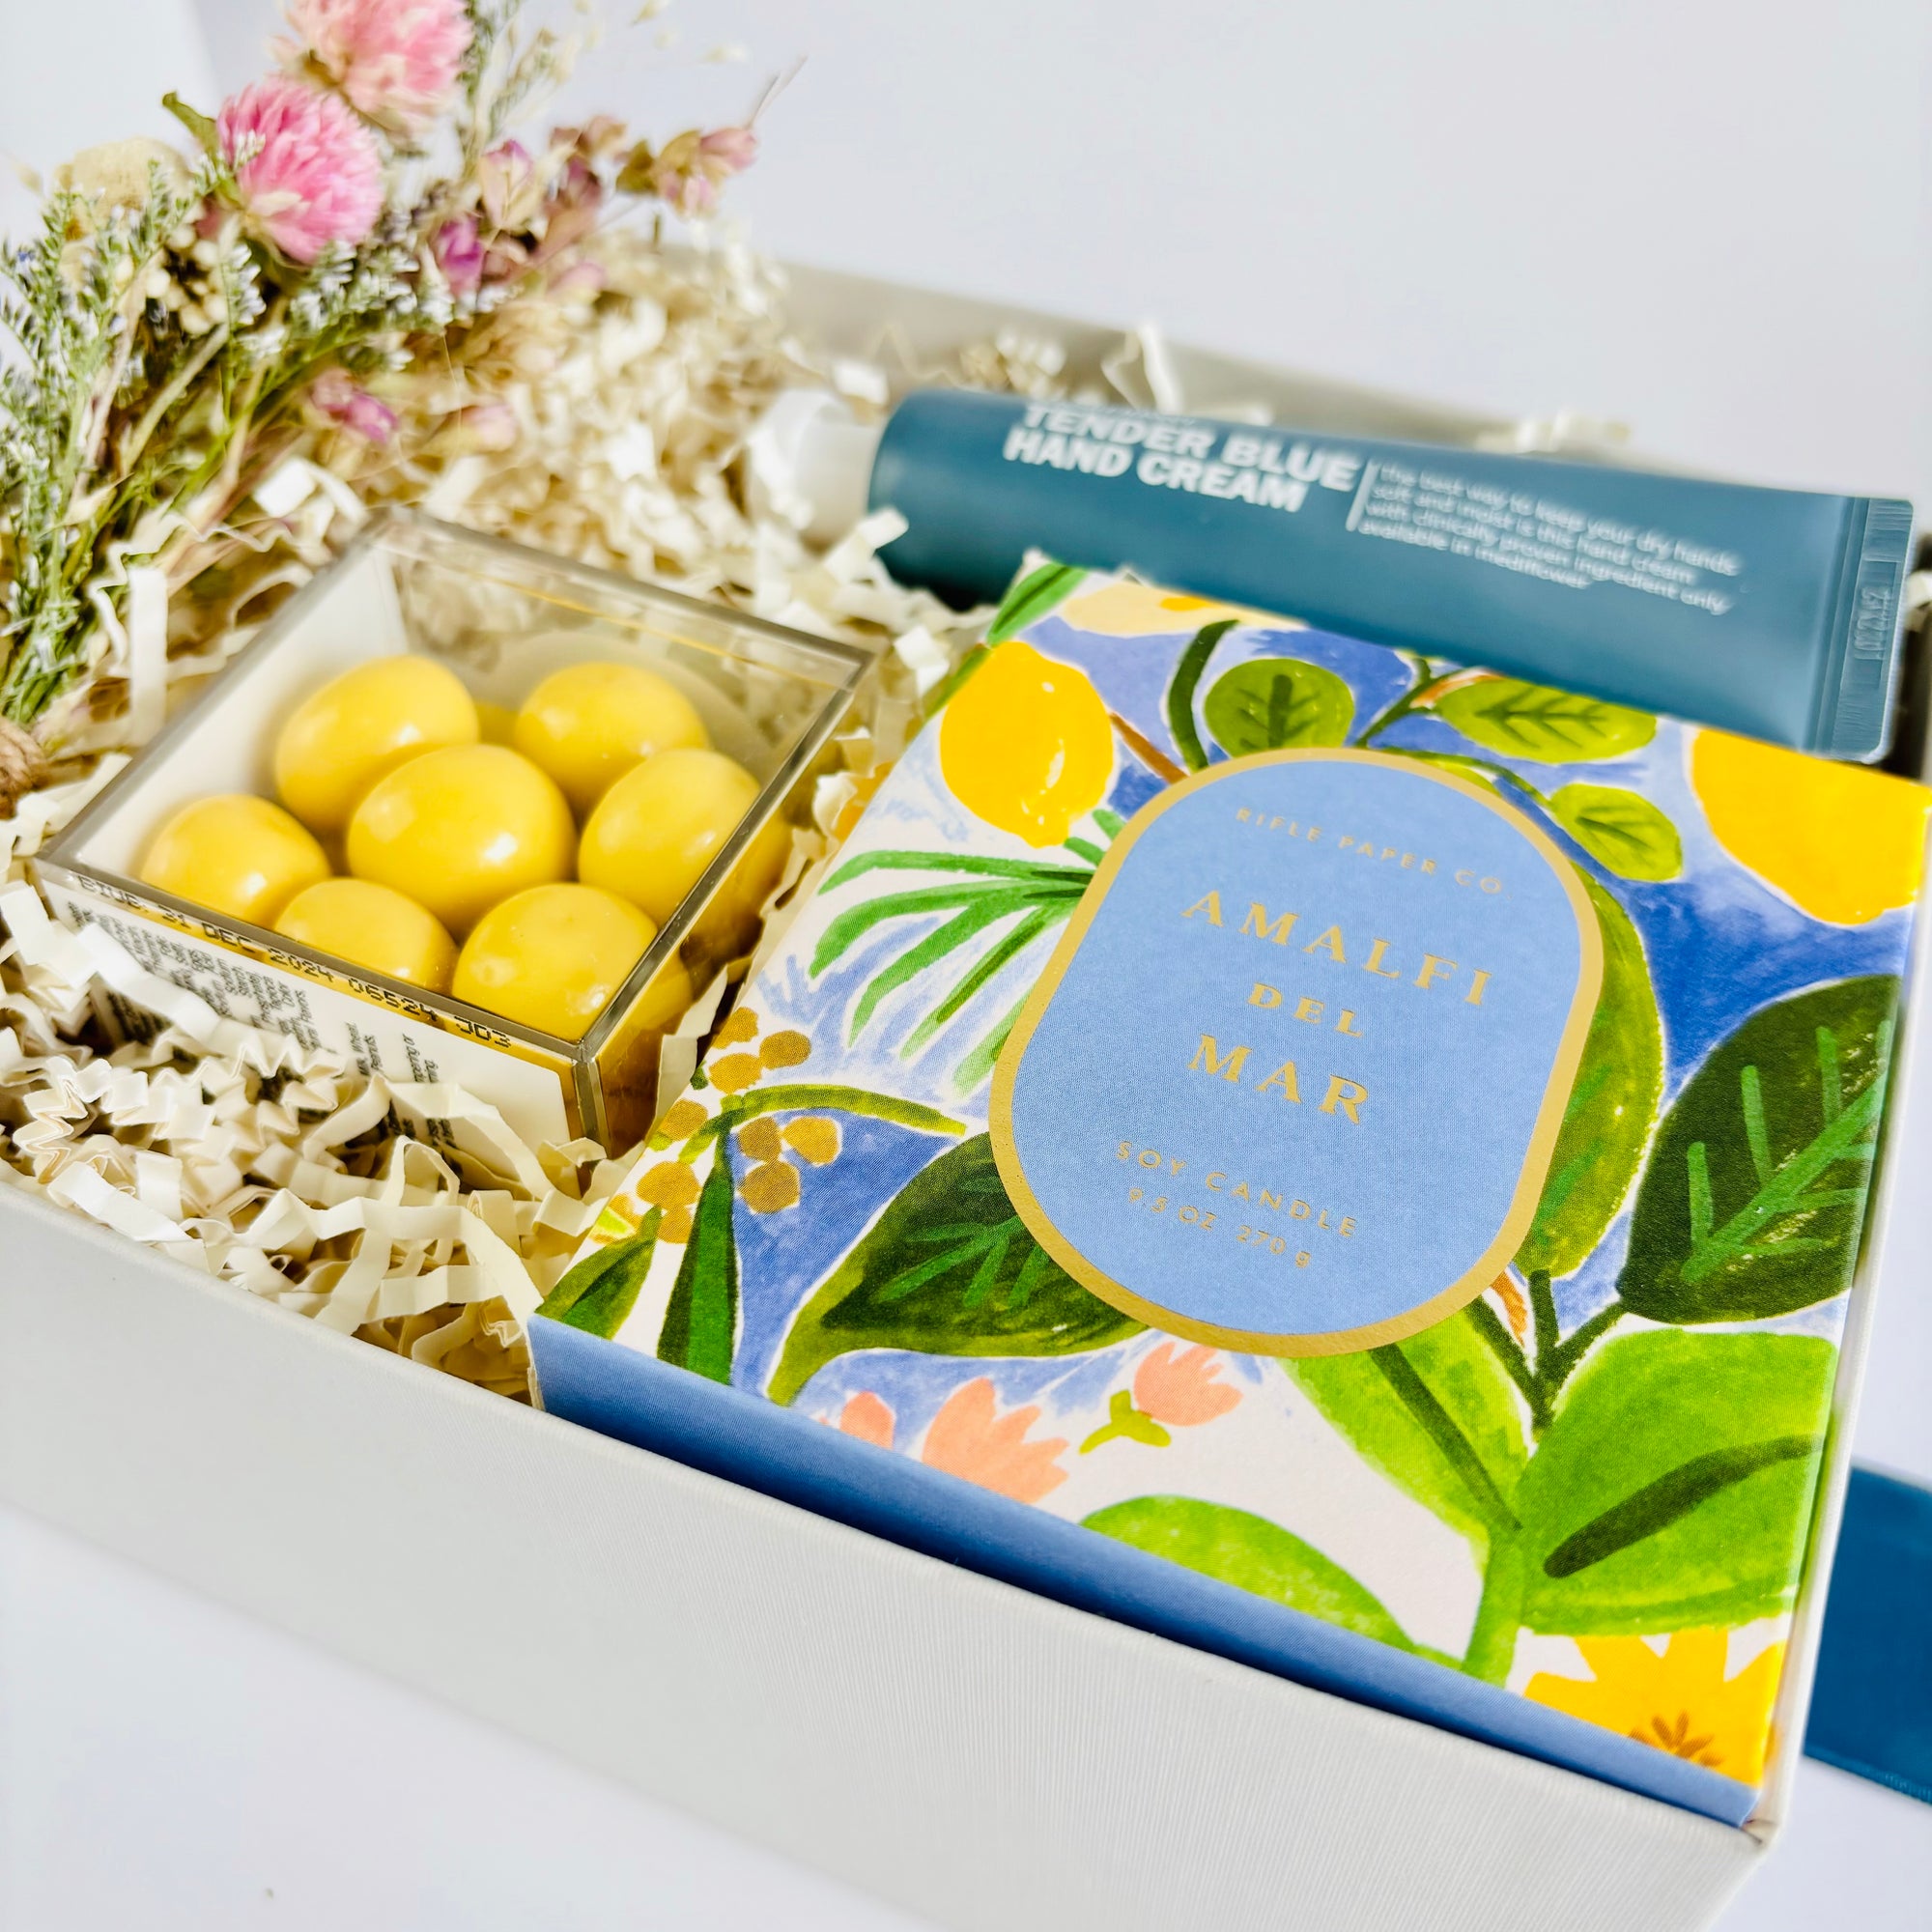 curated gift boxes, Mother's Day gifts, best Mother's Day gift ideas, send a Mother's Day gift box, gift baskets, spring curated gift box